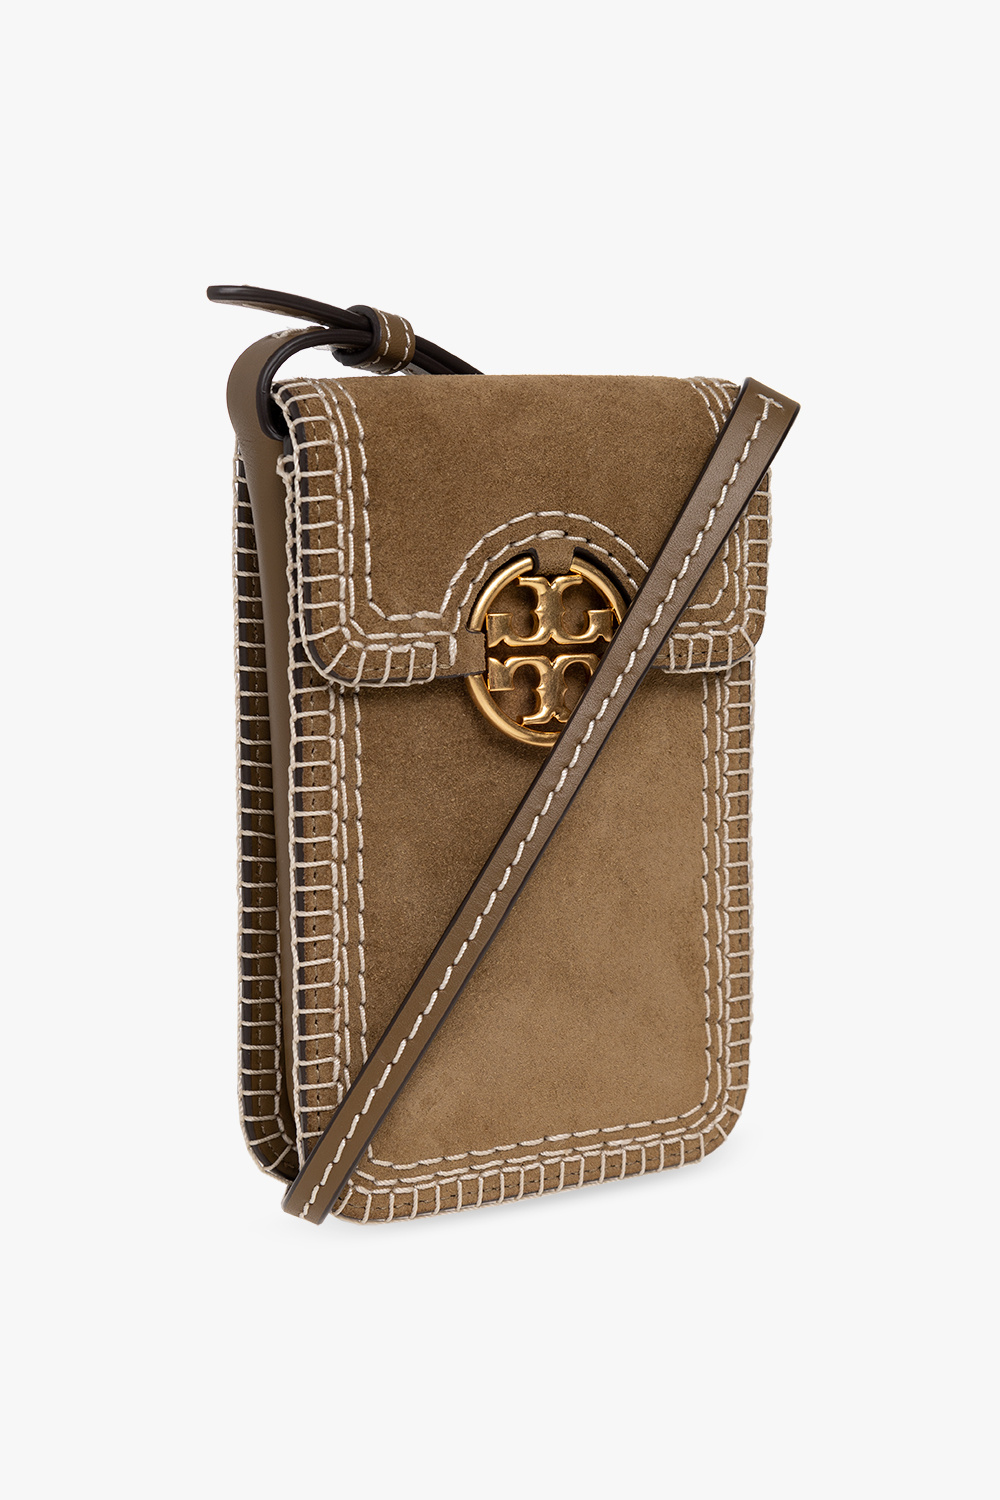 Tory Burch ‘Miller’ strapped phone holder